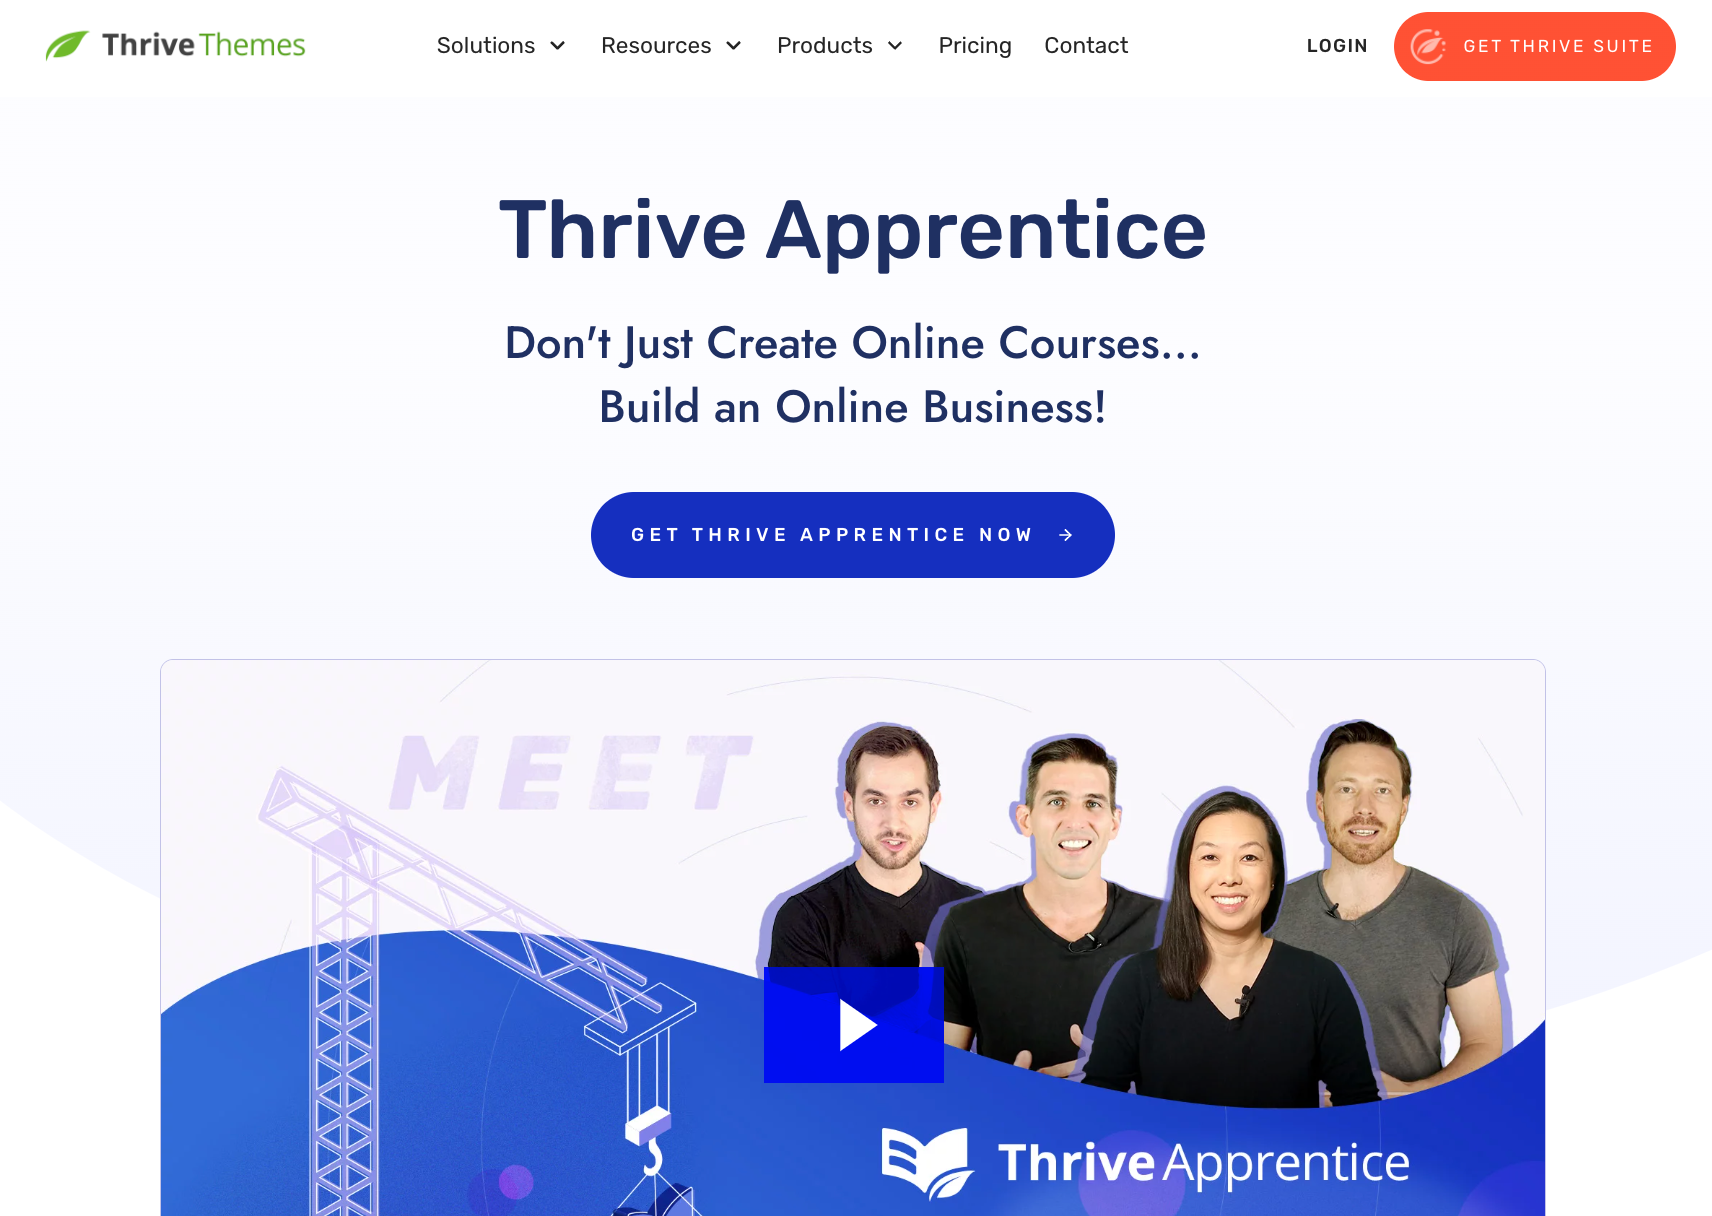 Thrive Apprentice is also a great tool.